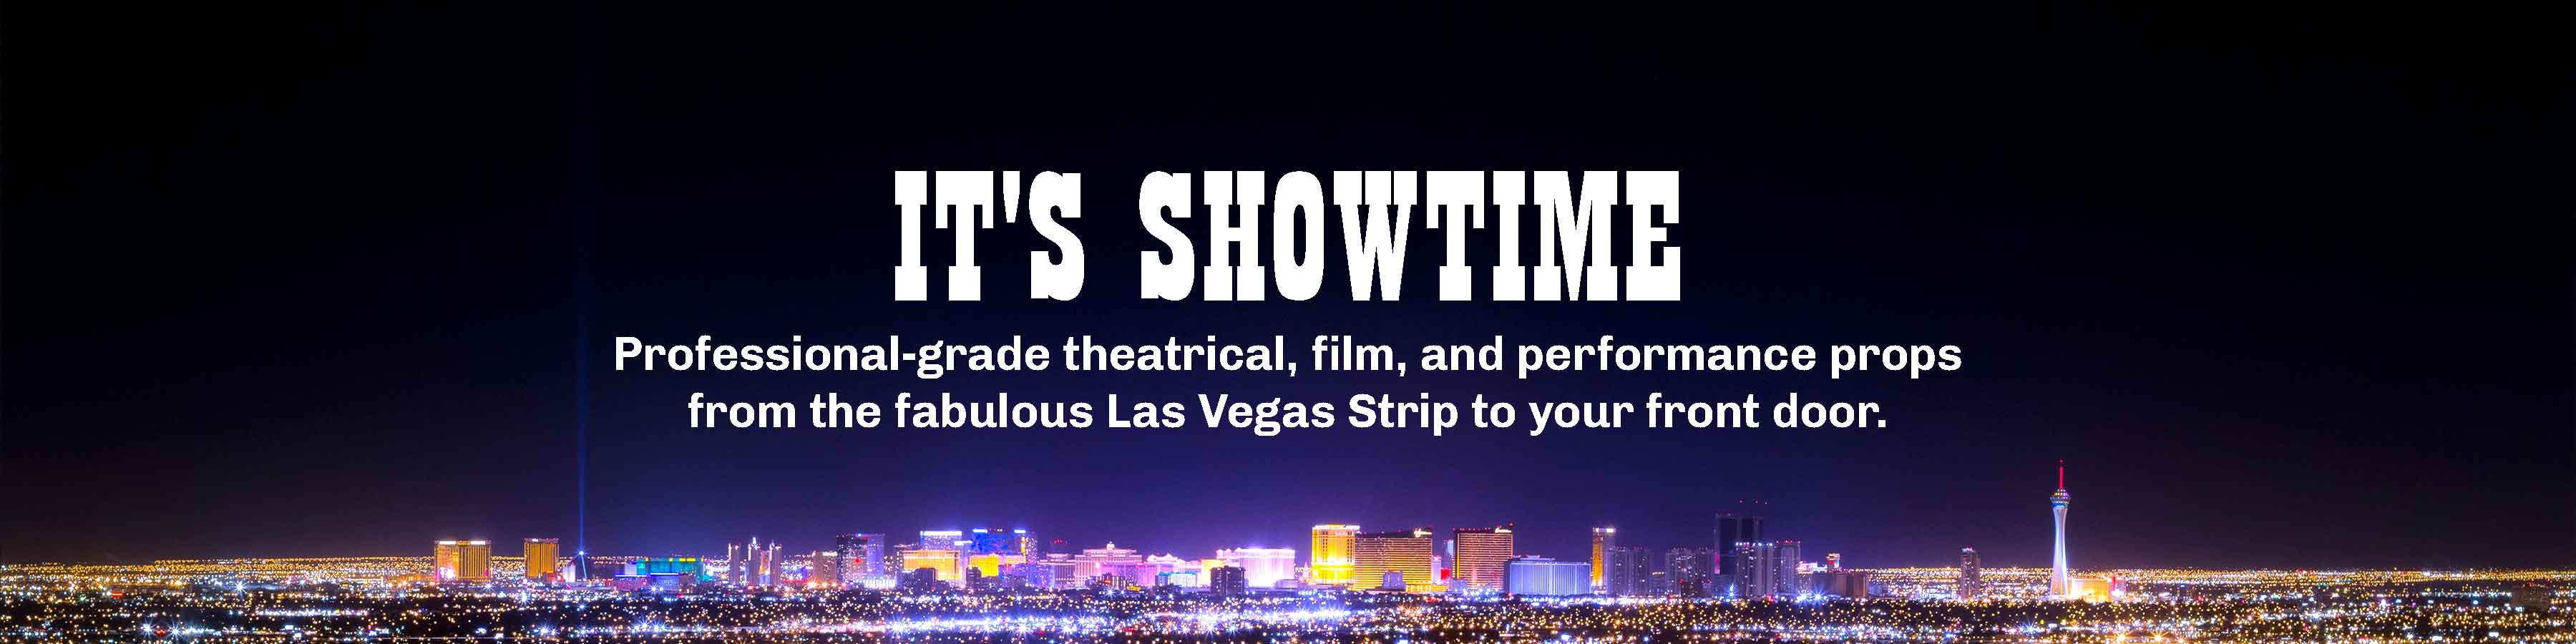 Title - It's showtime. Caption - Professional-grade theatrical, film, and performance props from the fablous Las Vegas Strip to your front door.  